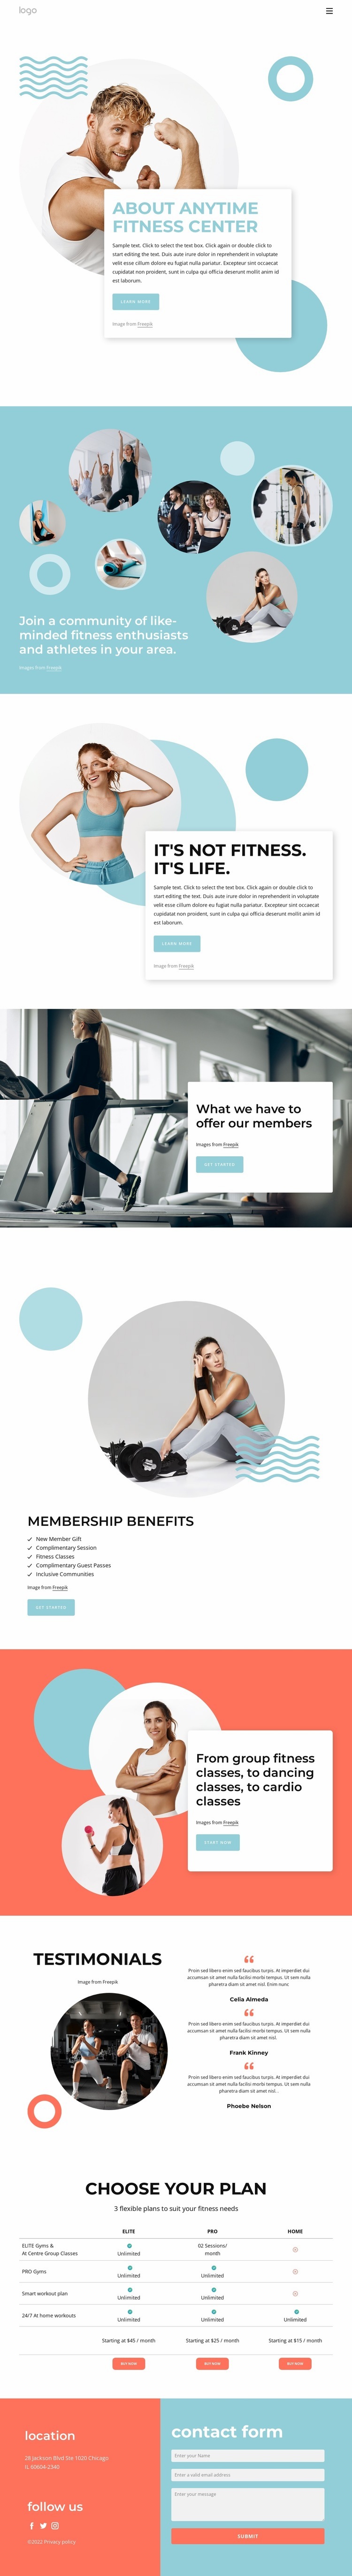 About Anytime fitness center Squarespace Template Alternative